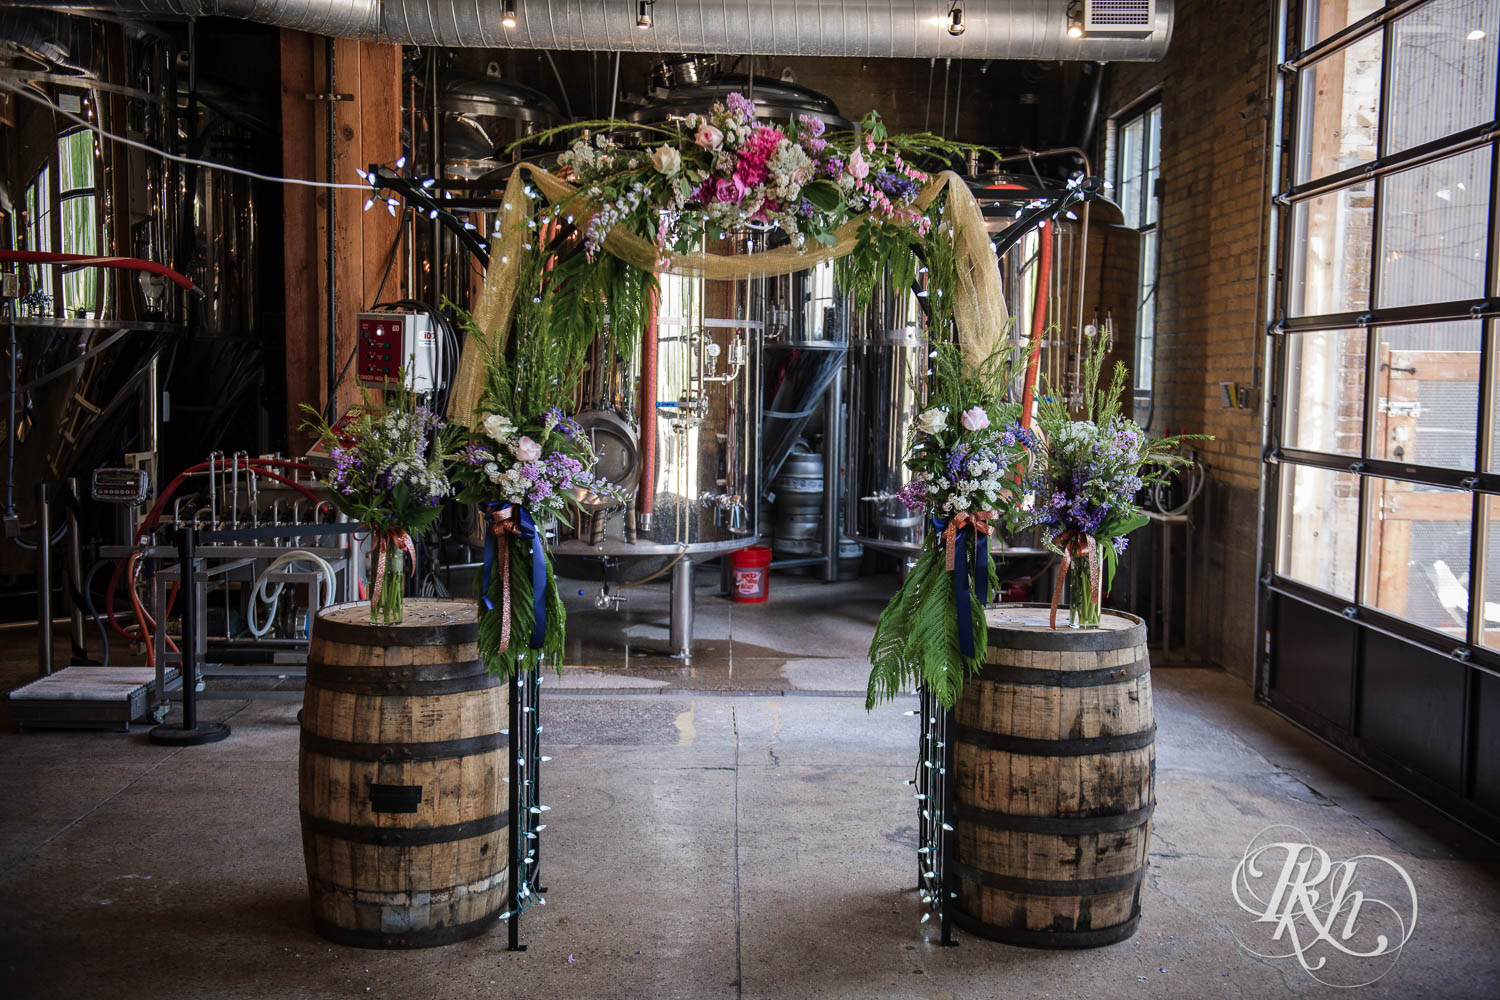 Wedding arch with flowers in 612 Brew in Minneapolis, Minnesota.